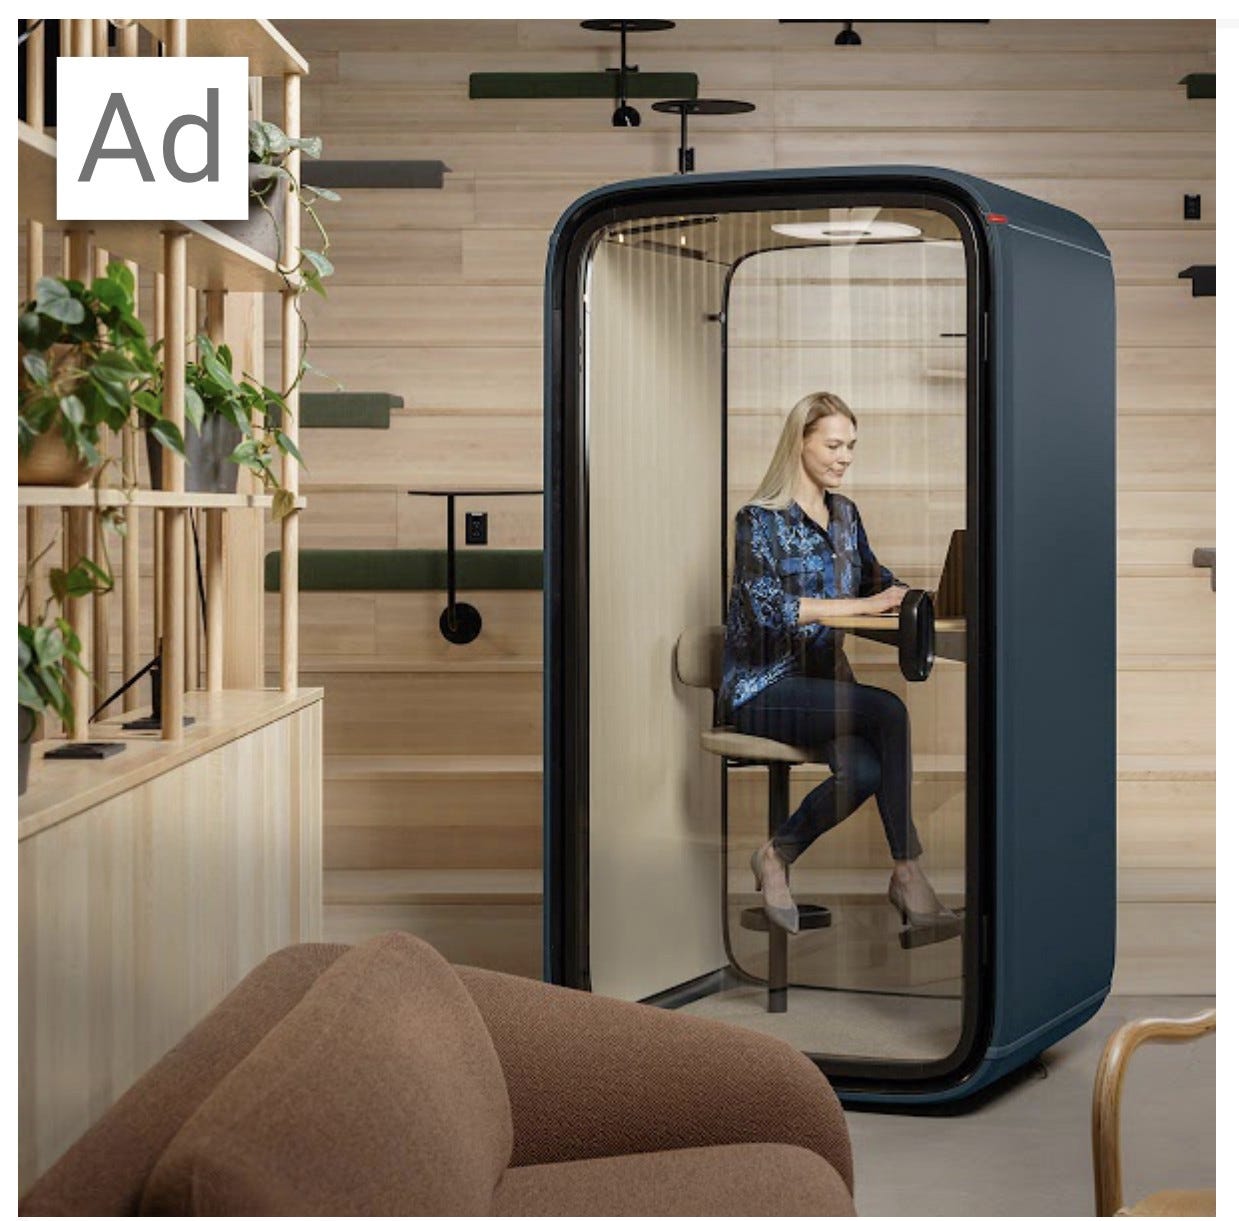 An ad for a soundproof isolation booth from Spacify.